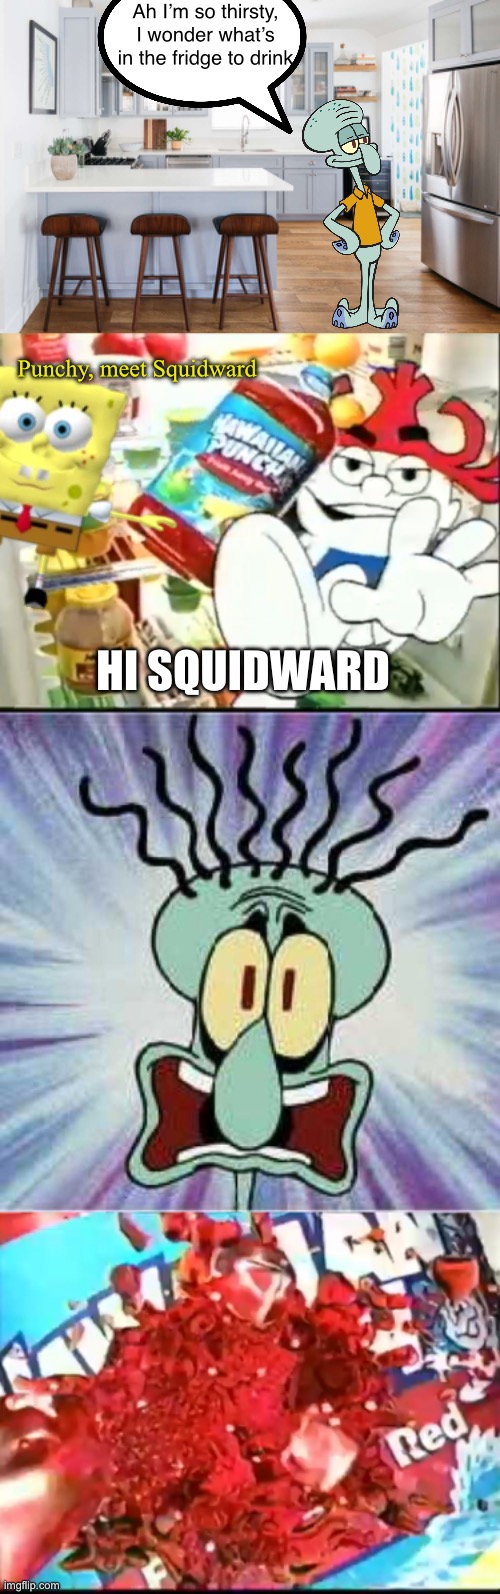 The Fruit Juicy punch | Ah I’m so thirsty, I wonder what’s in the fridge to drink; Punchy, meet Squidward; HI SQUIDWARD | image tagged in hi squidward,hawaiian punch,spongebob,squidward,memes | made w/ Imgflip meme maker